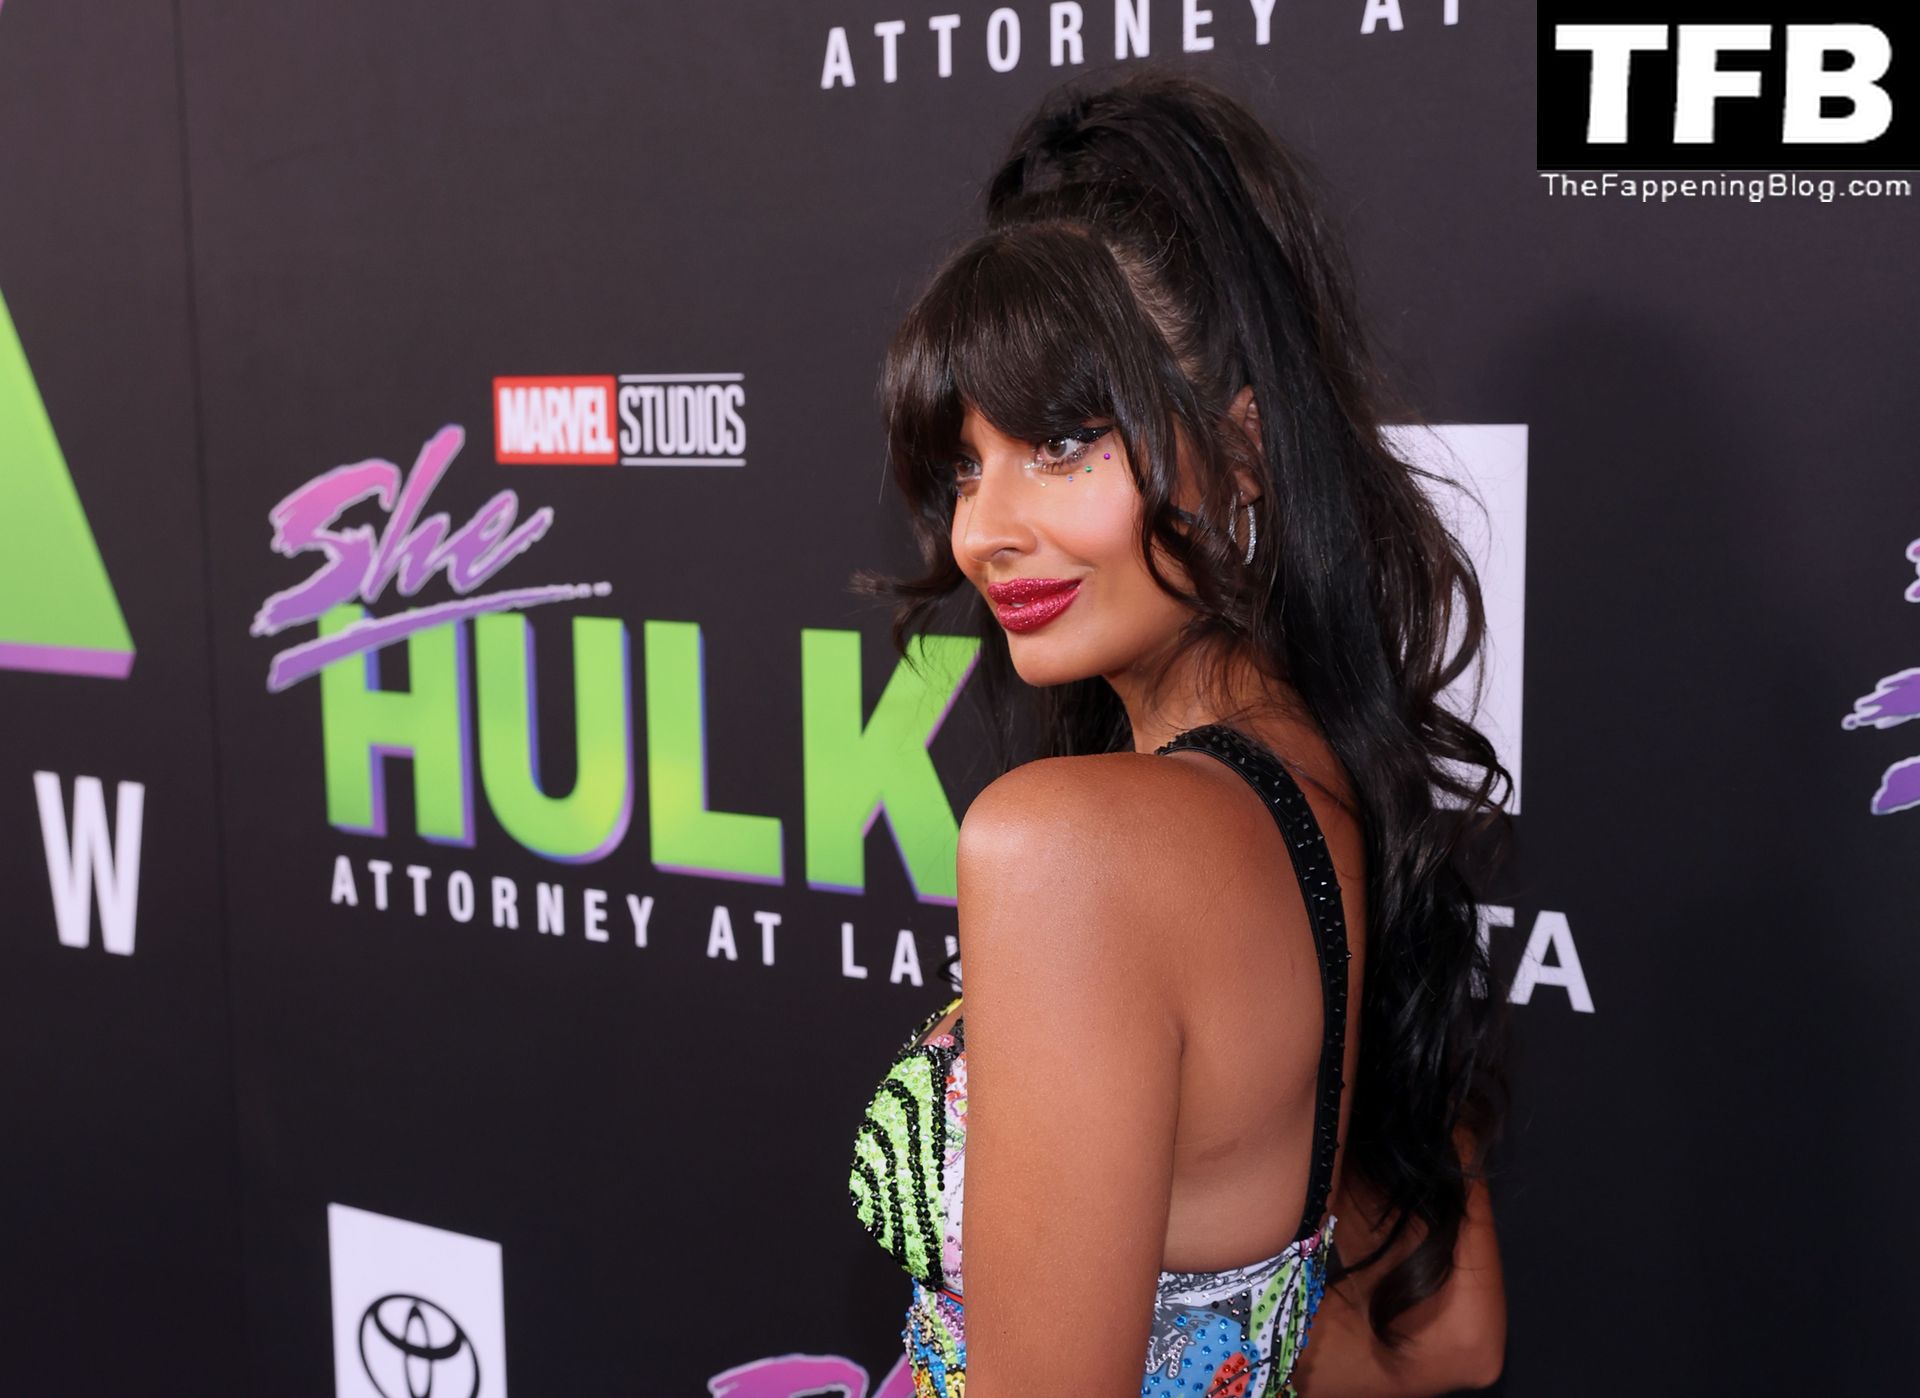 Jameela Jamil Sexy The Fappening Blog 33 - Jameela Jamil Flaunts Her Big Tits at the Premiere of Disney+’s “She Hulk: Attorney at Law” in LA (53 Photos)